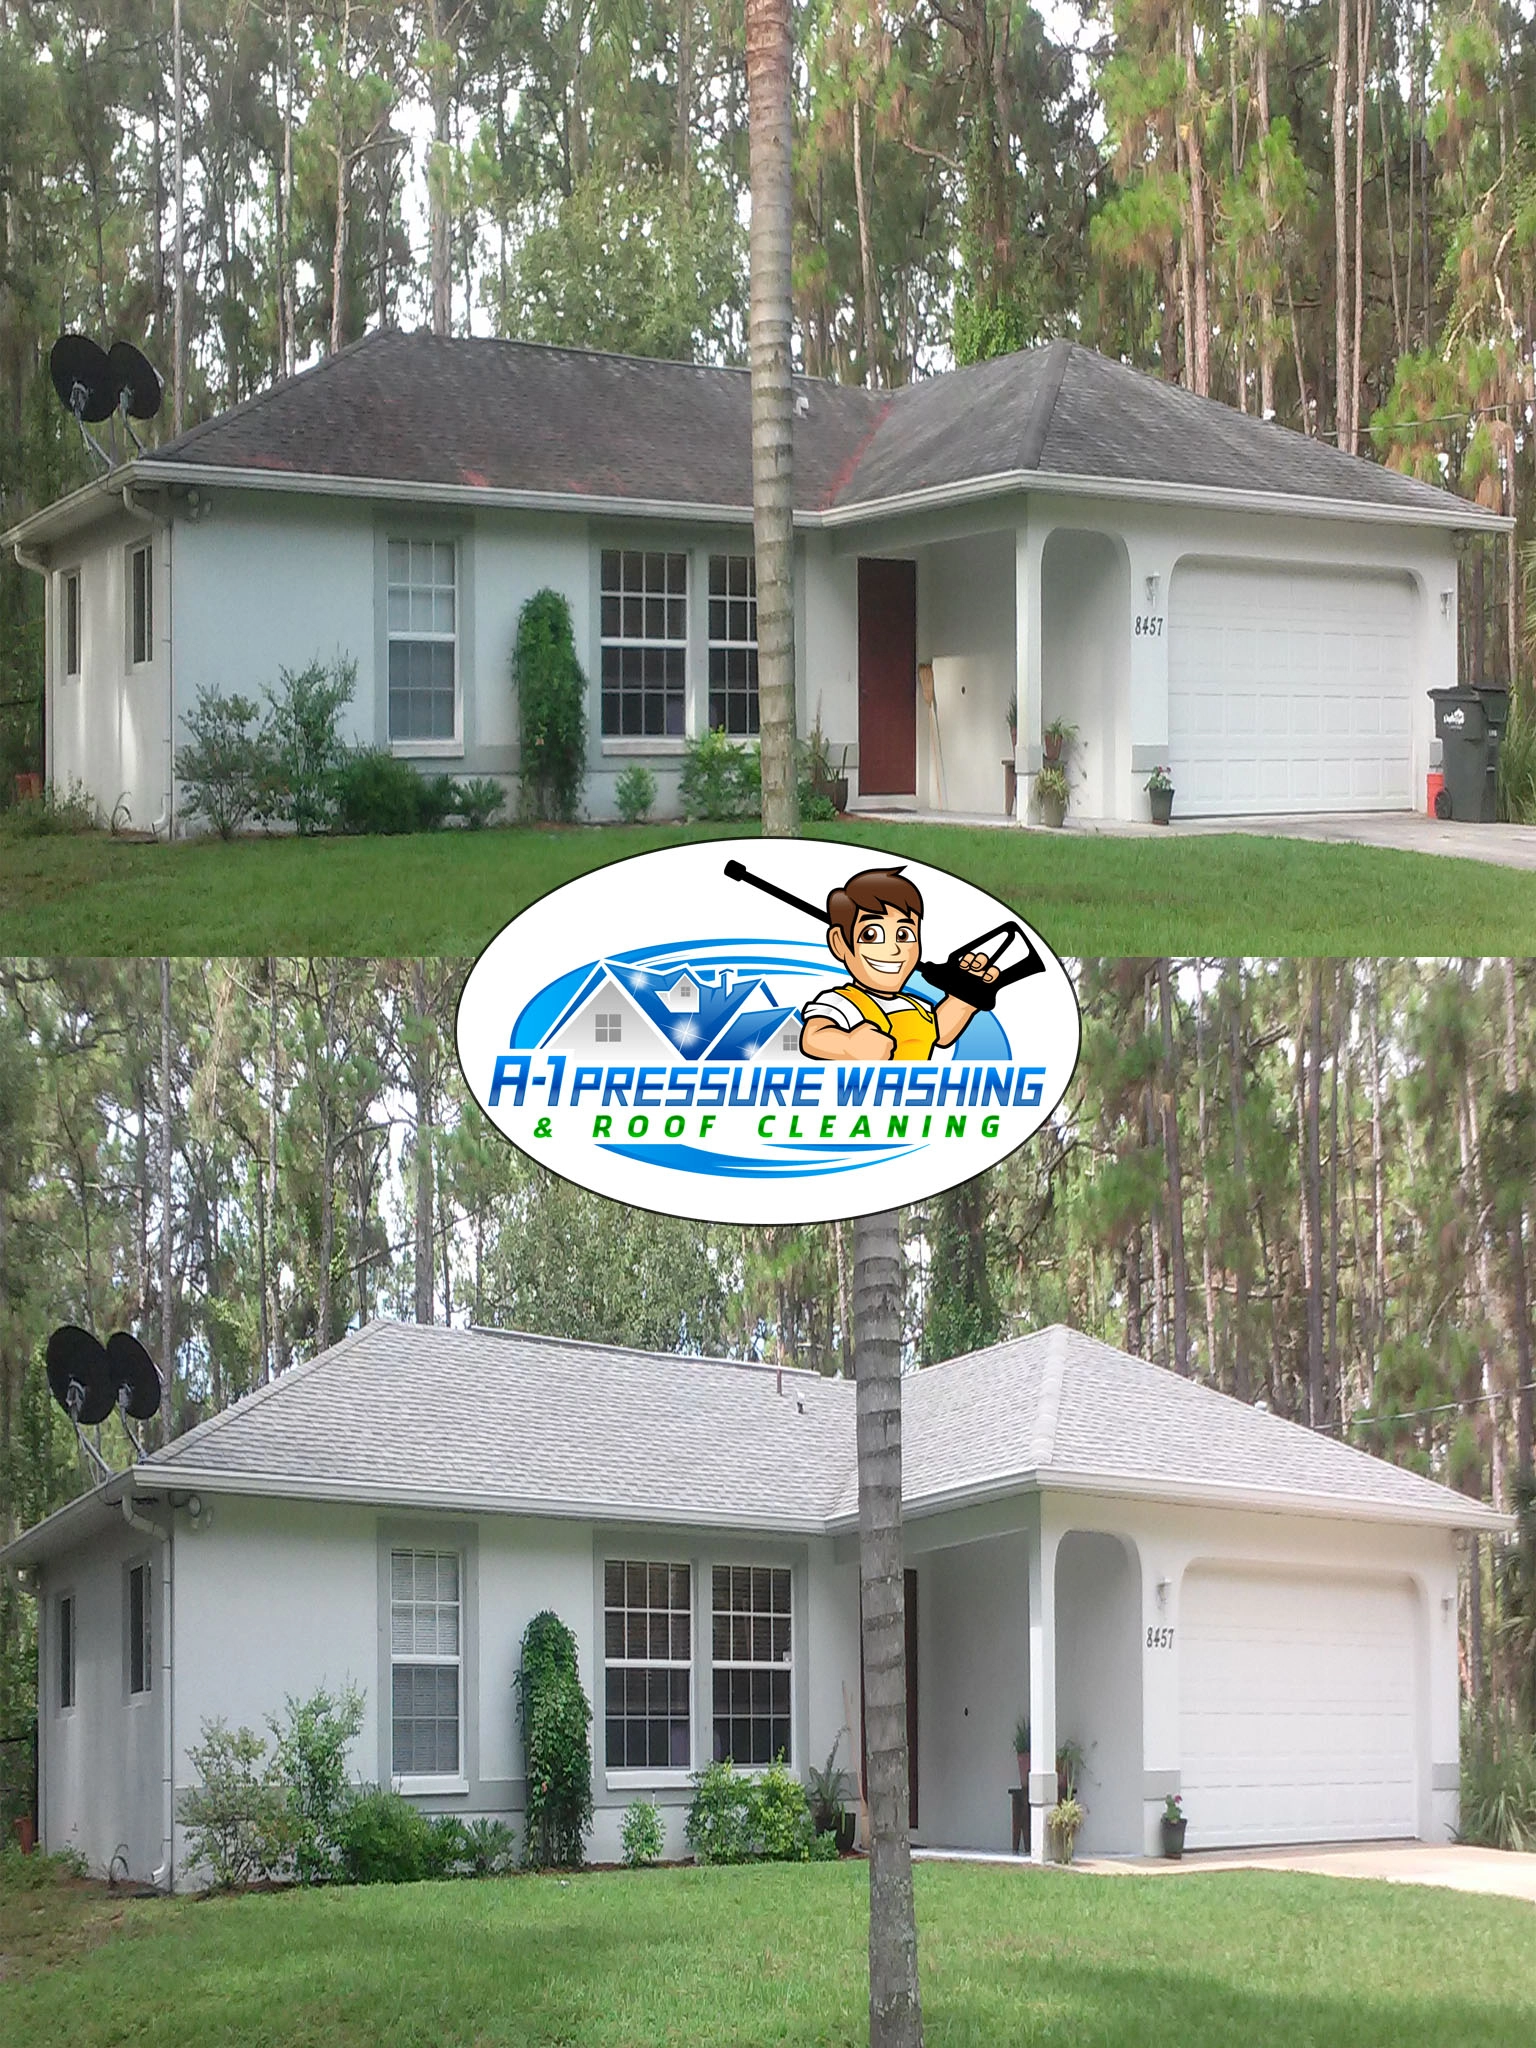 Shingle Roof Cleaning Services | A-1 Pressure Washing & Roof Cleaning